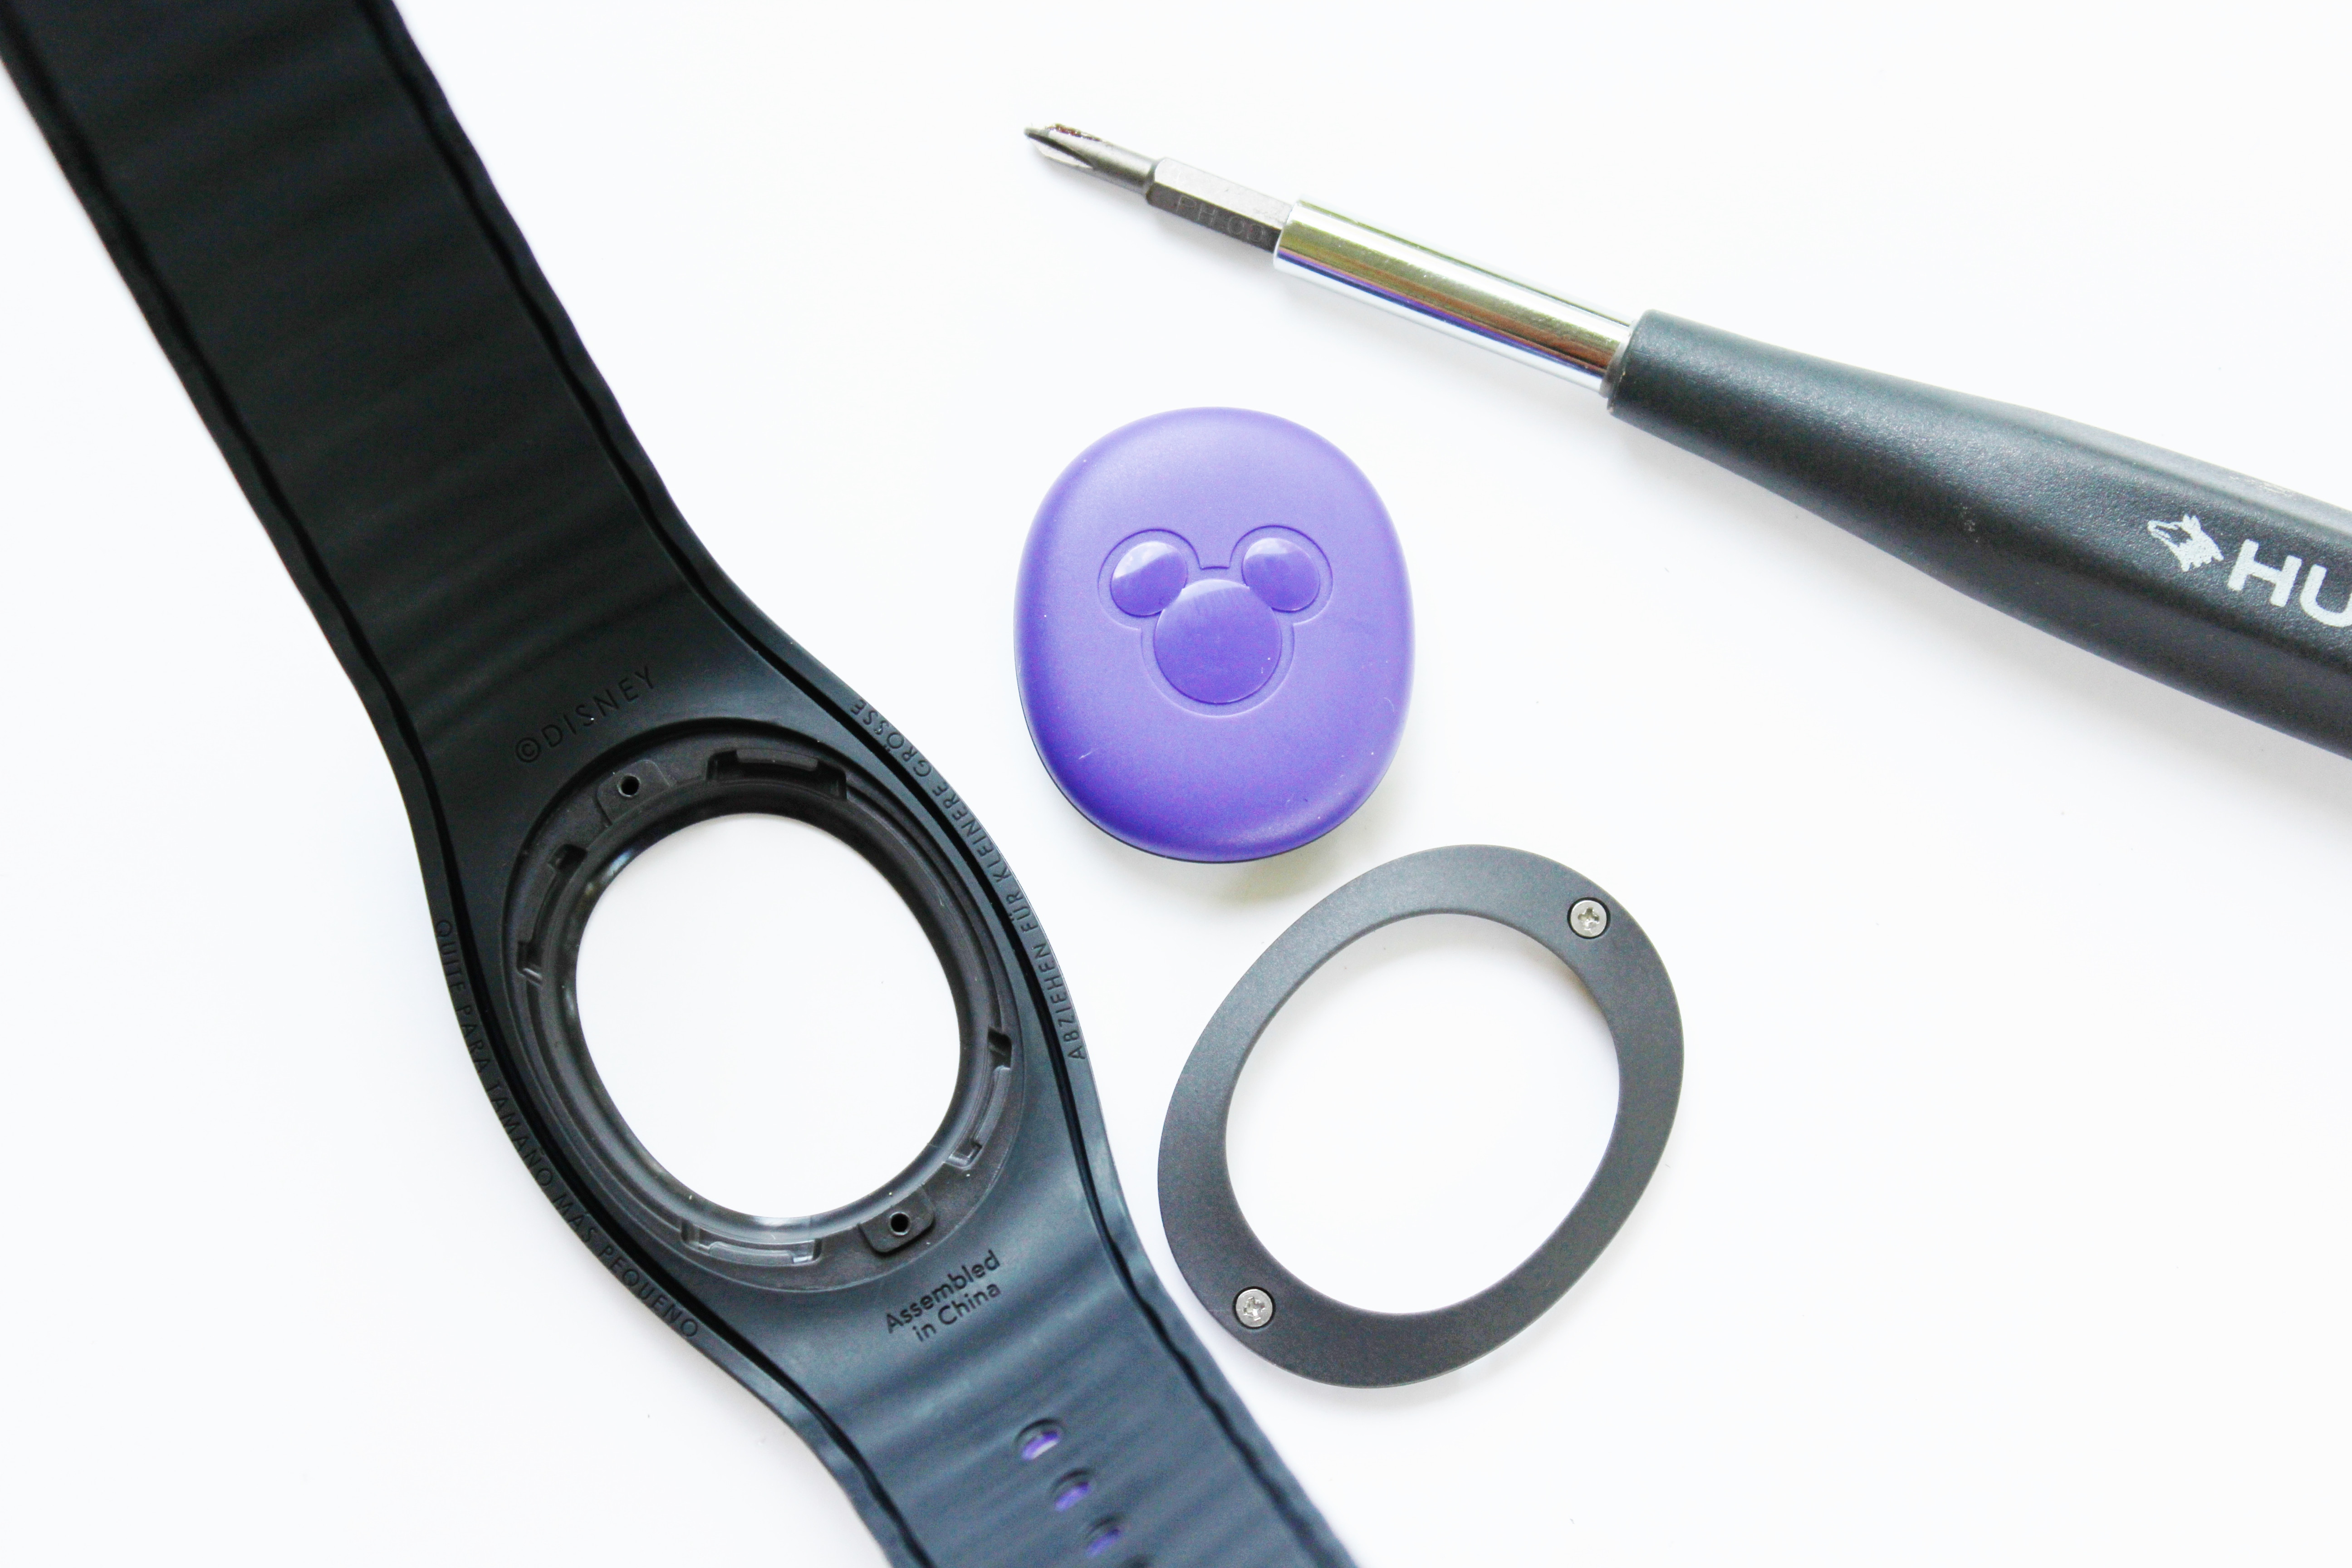 removing the puck from the magic band